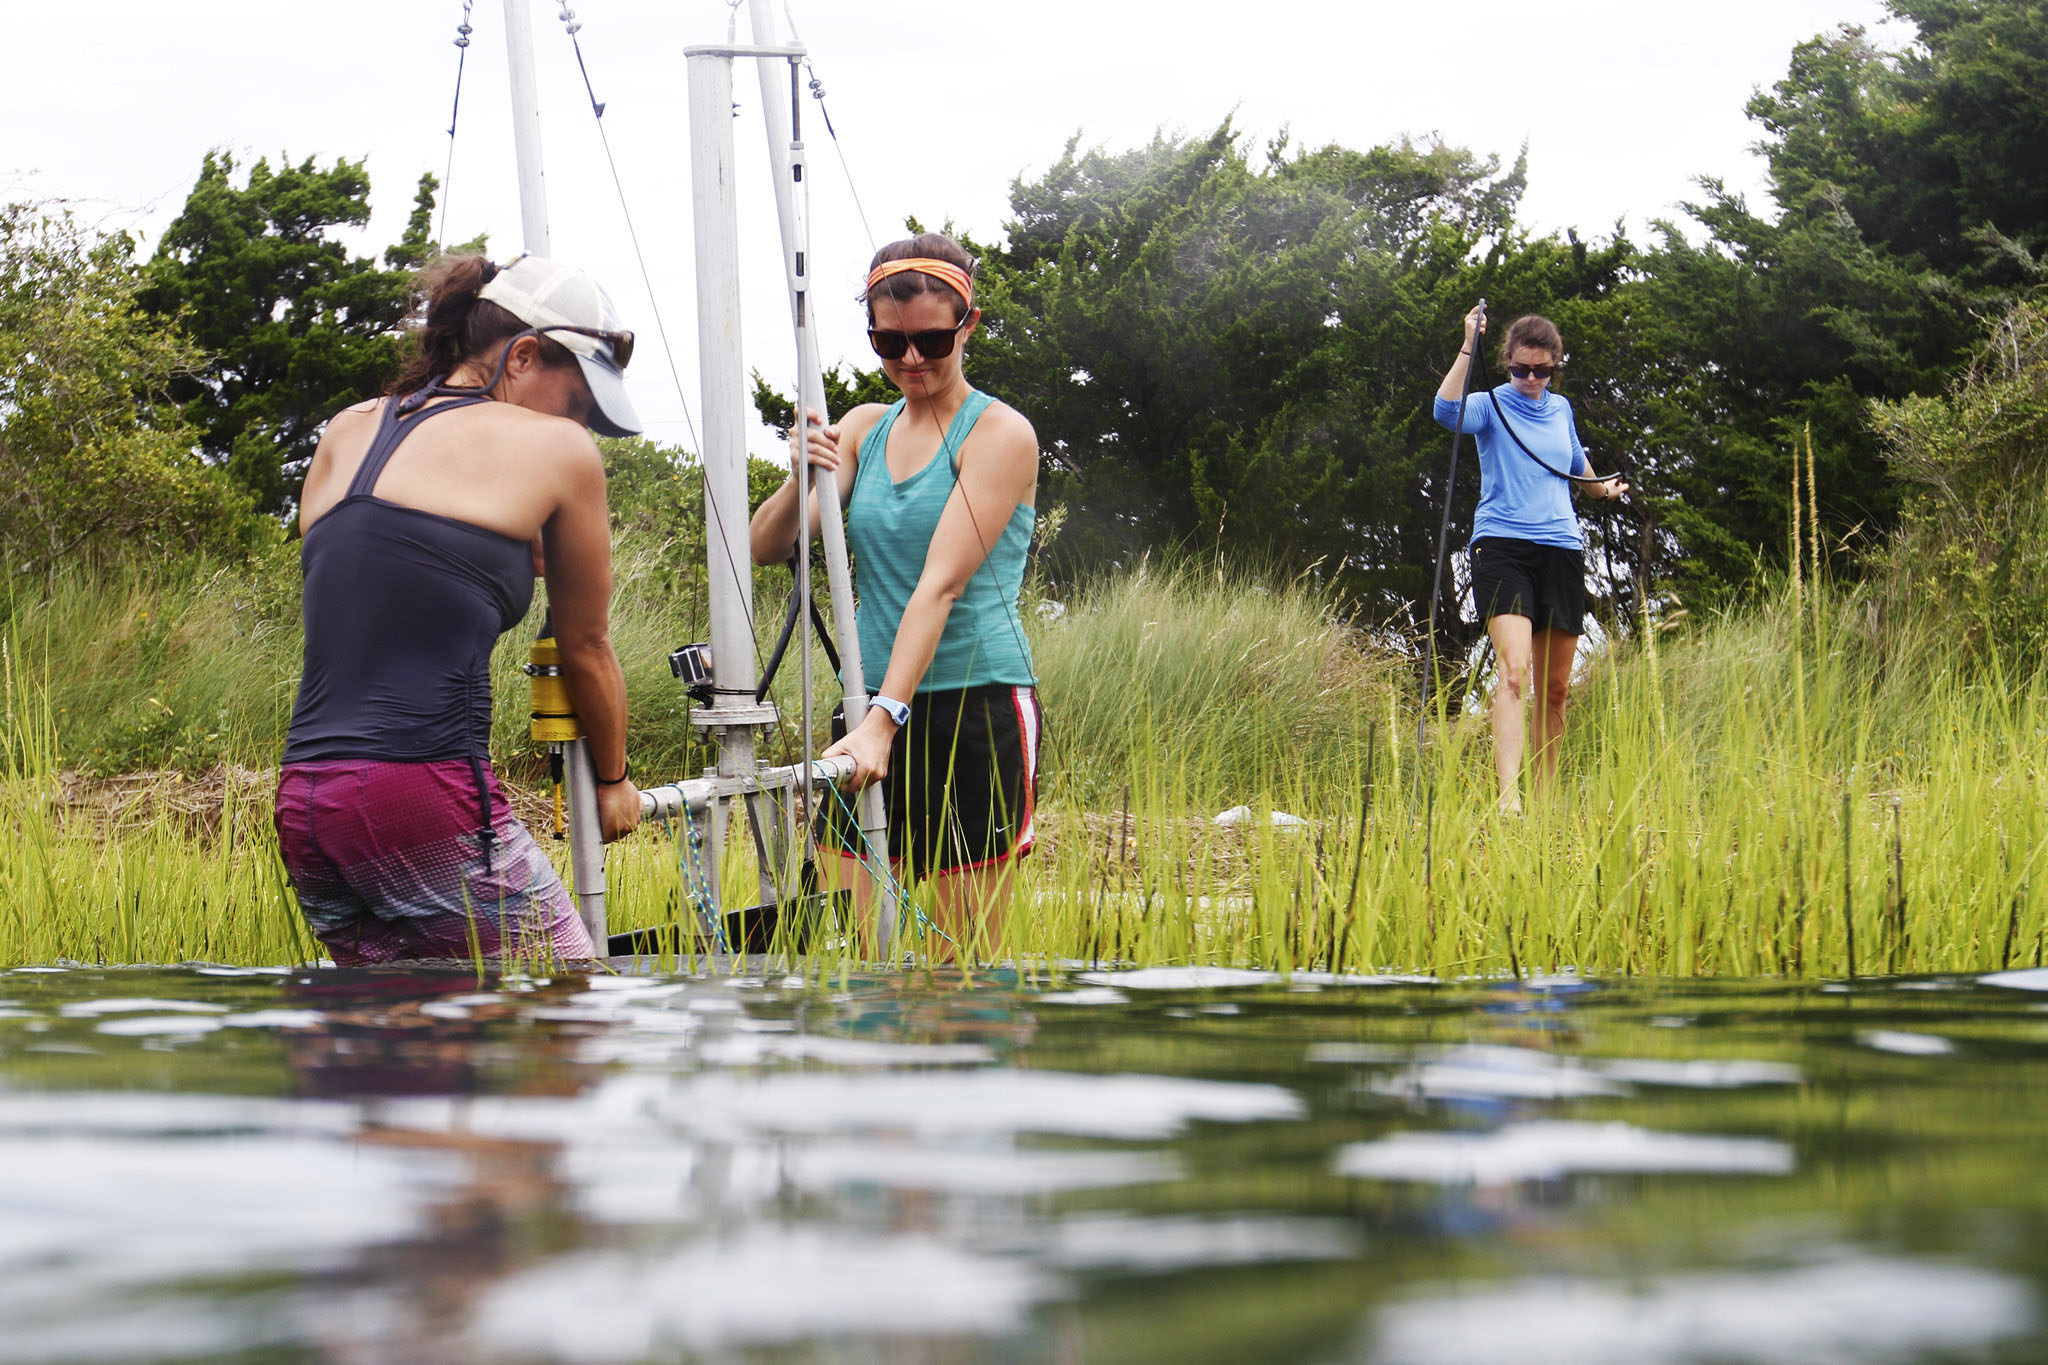 Three female graduate students perform research in the water on local living shorelines in Beaufort, NC.